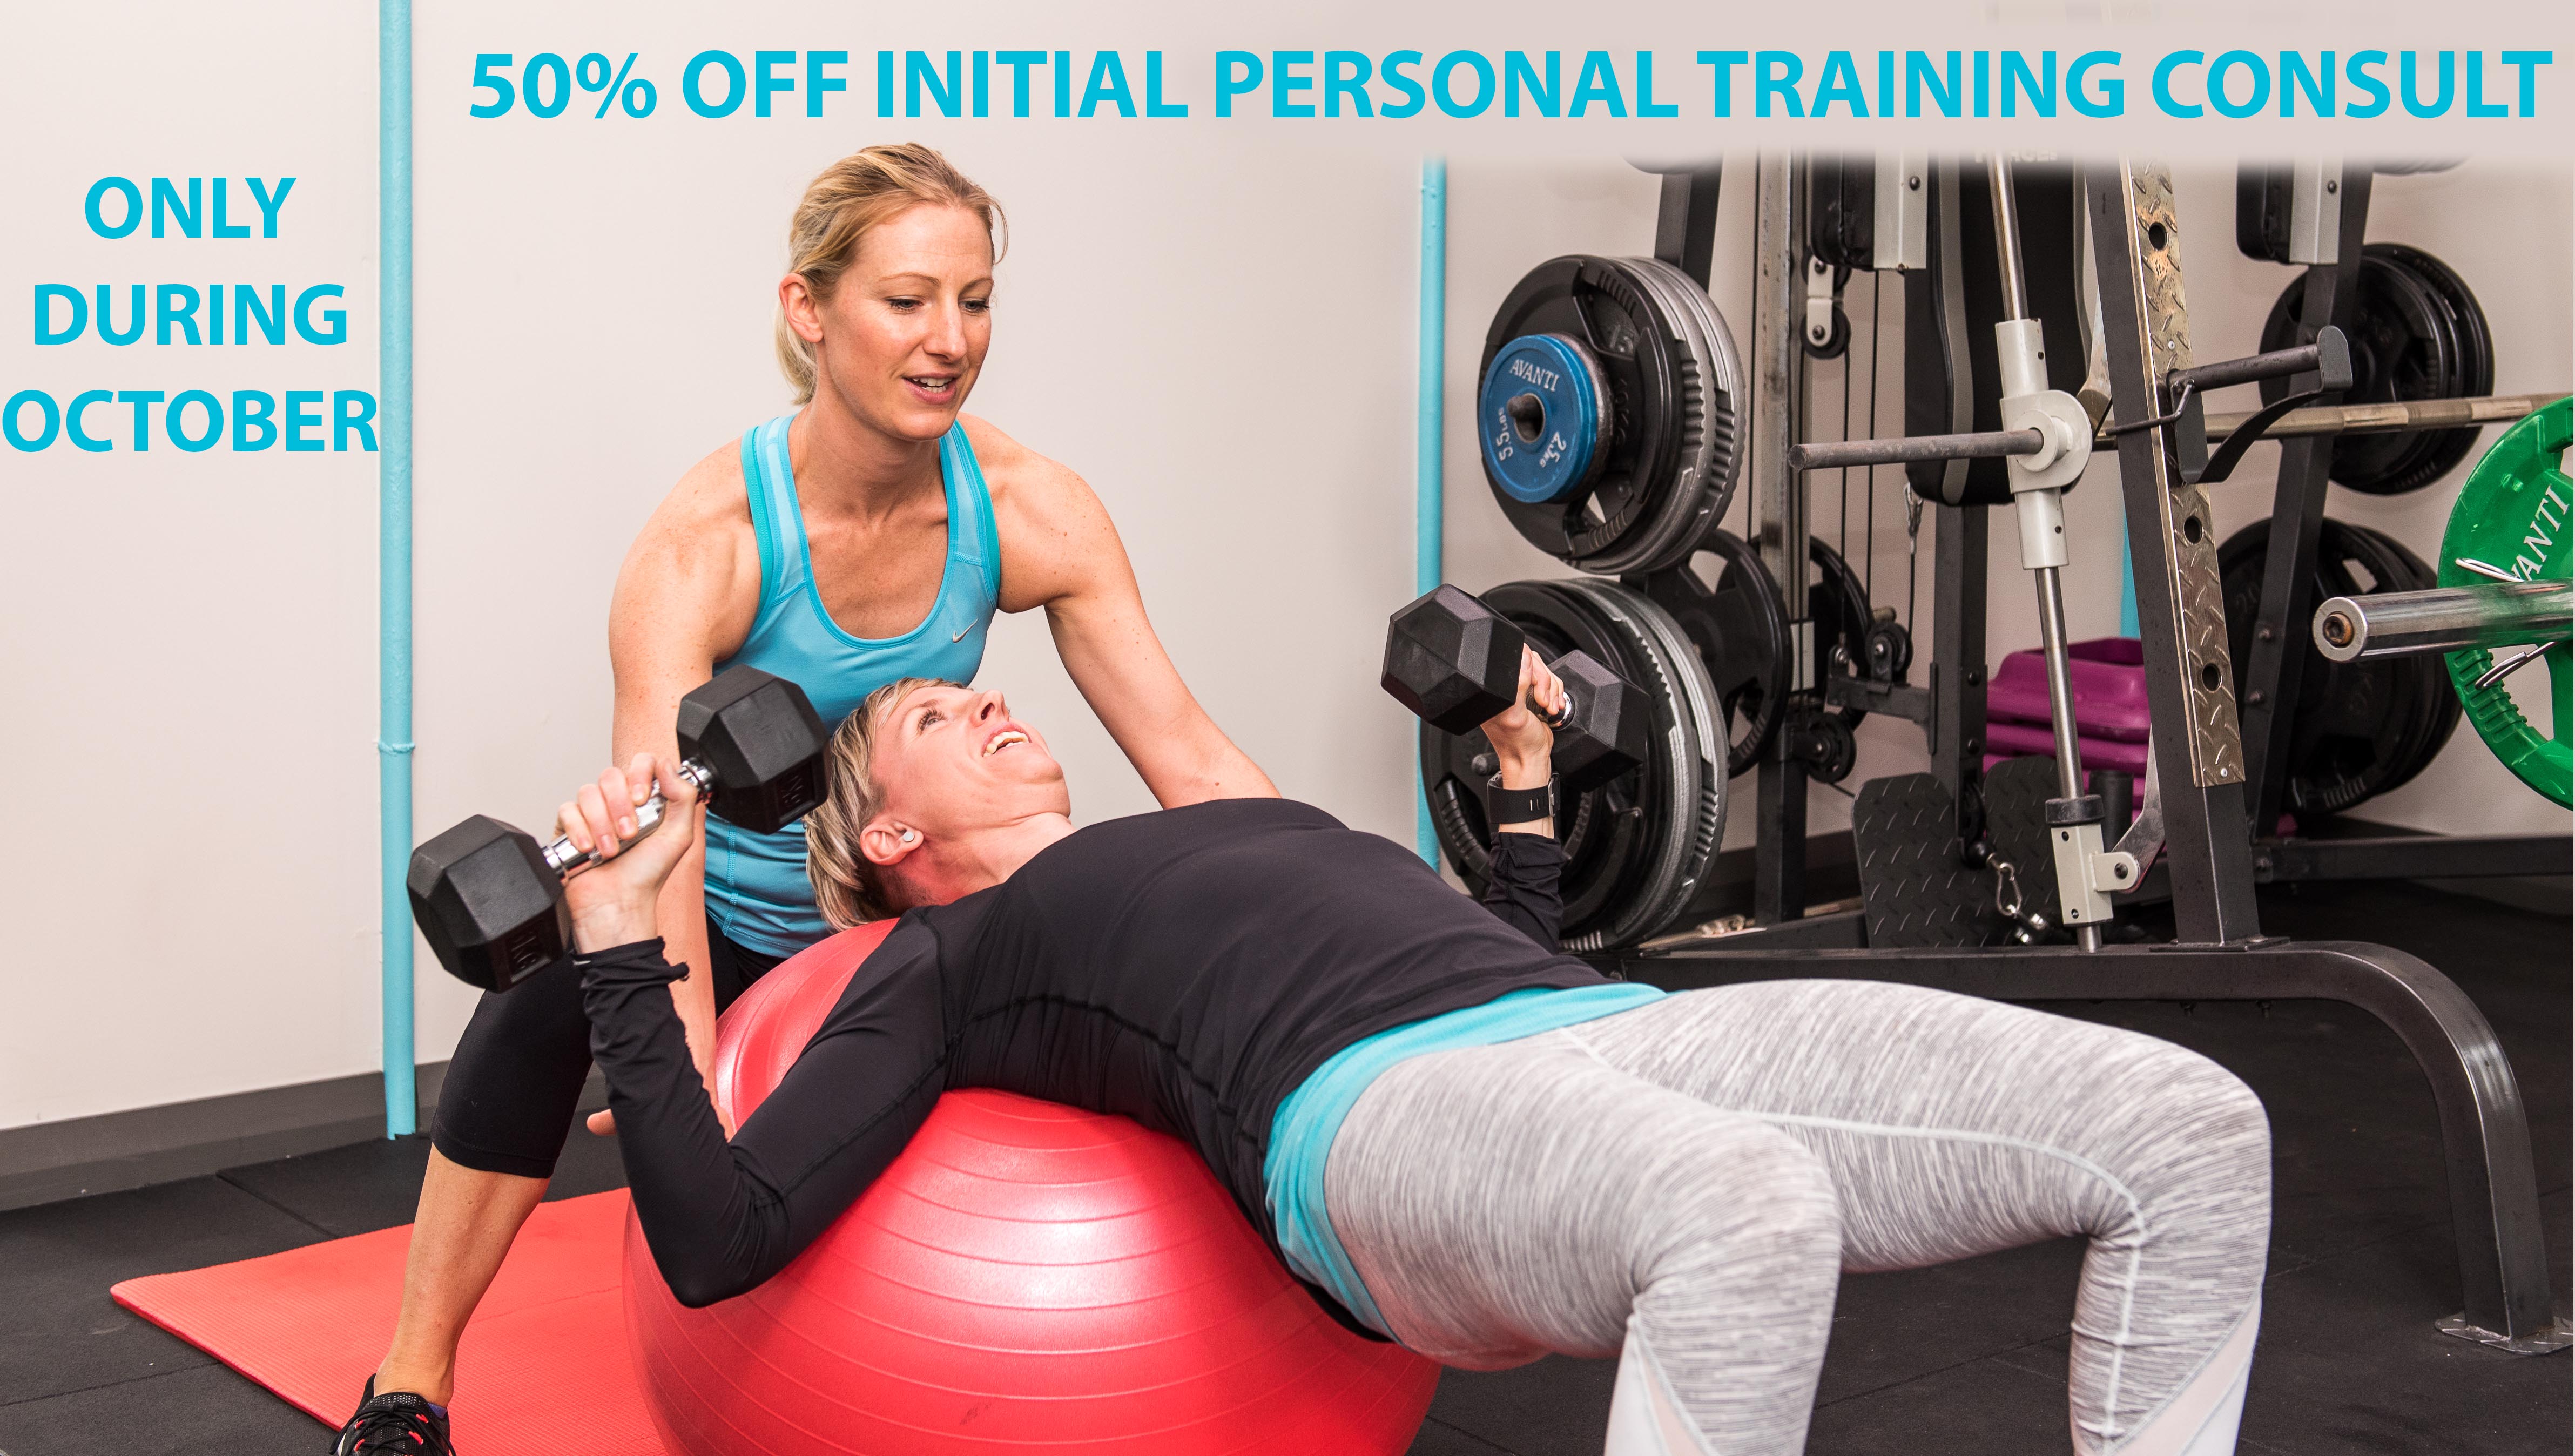 50% OFF Initial Personal Training Consult in October